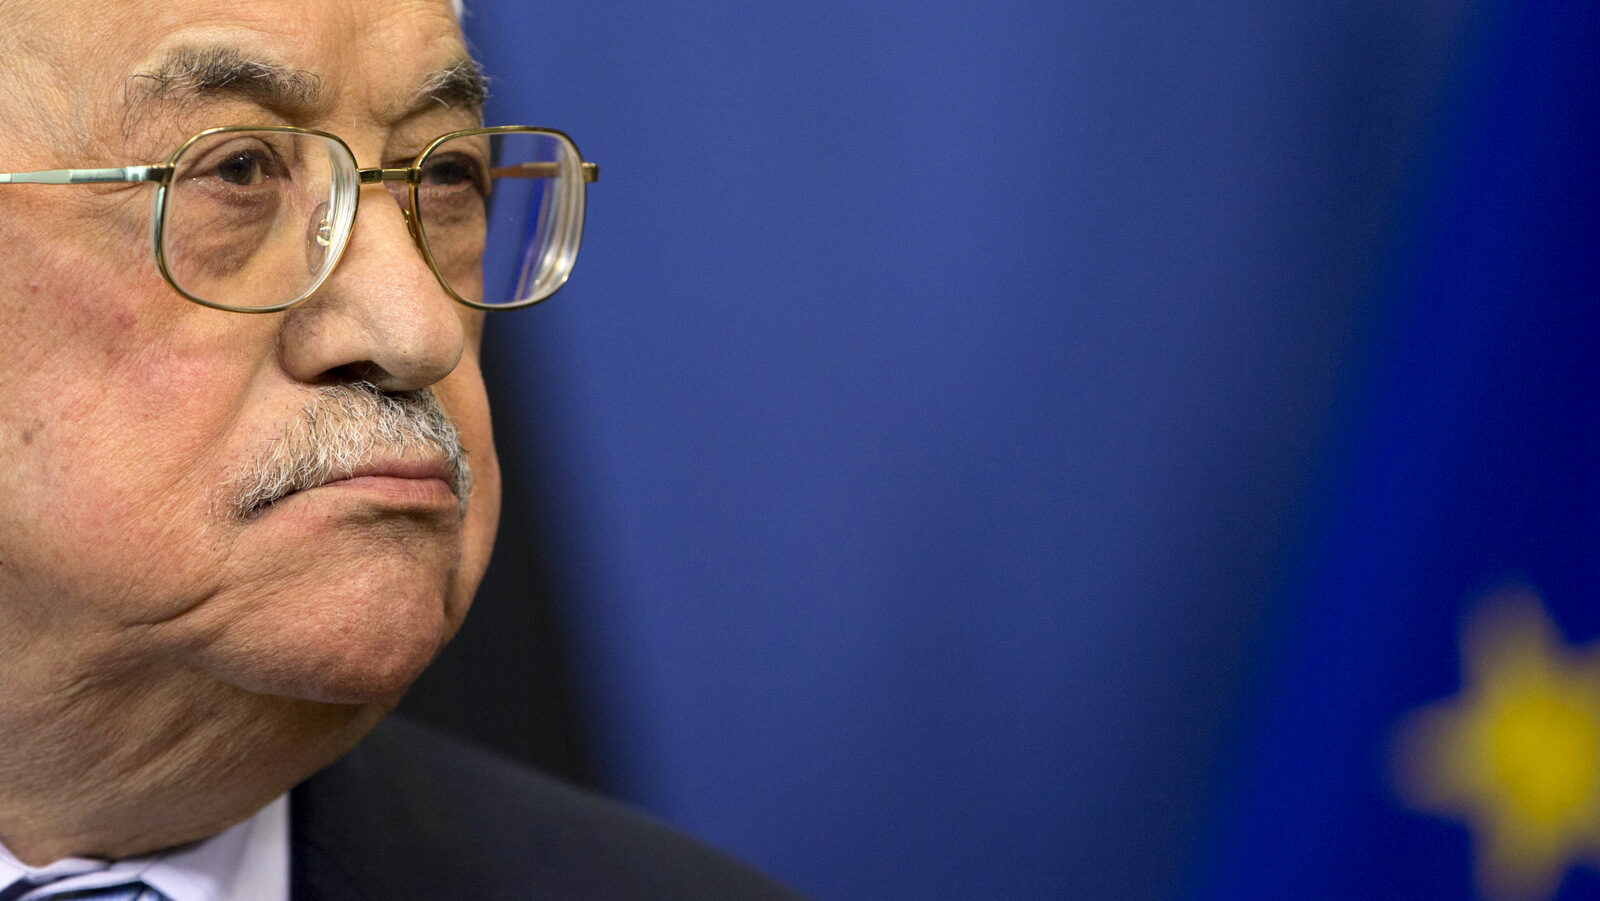 Palestinian President Mahmoud Abbas listens during a media conference at EU headquarters in Brussels, Belgium. Abbas wants peace talks with Israel without any preconditions at all, as soon as possible. (AP/Virginia Mayo)